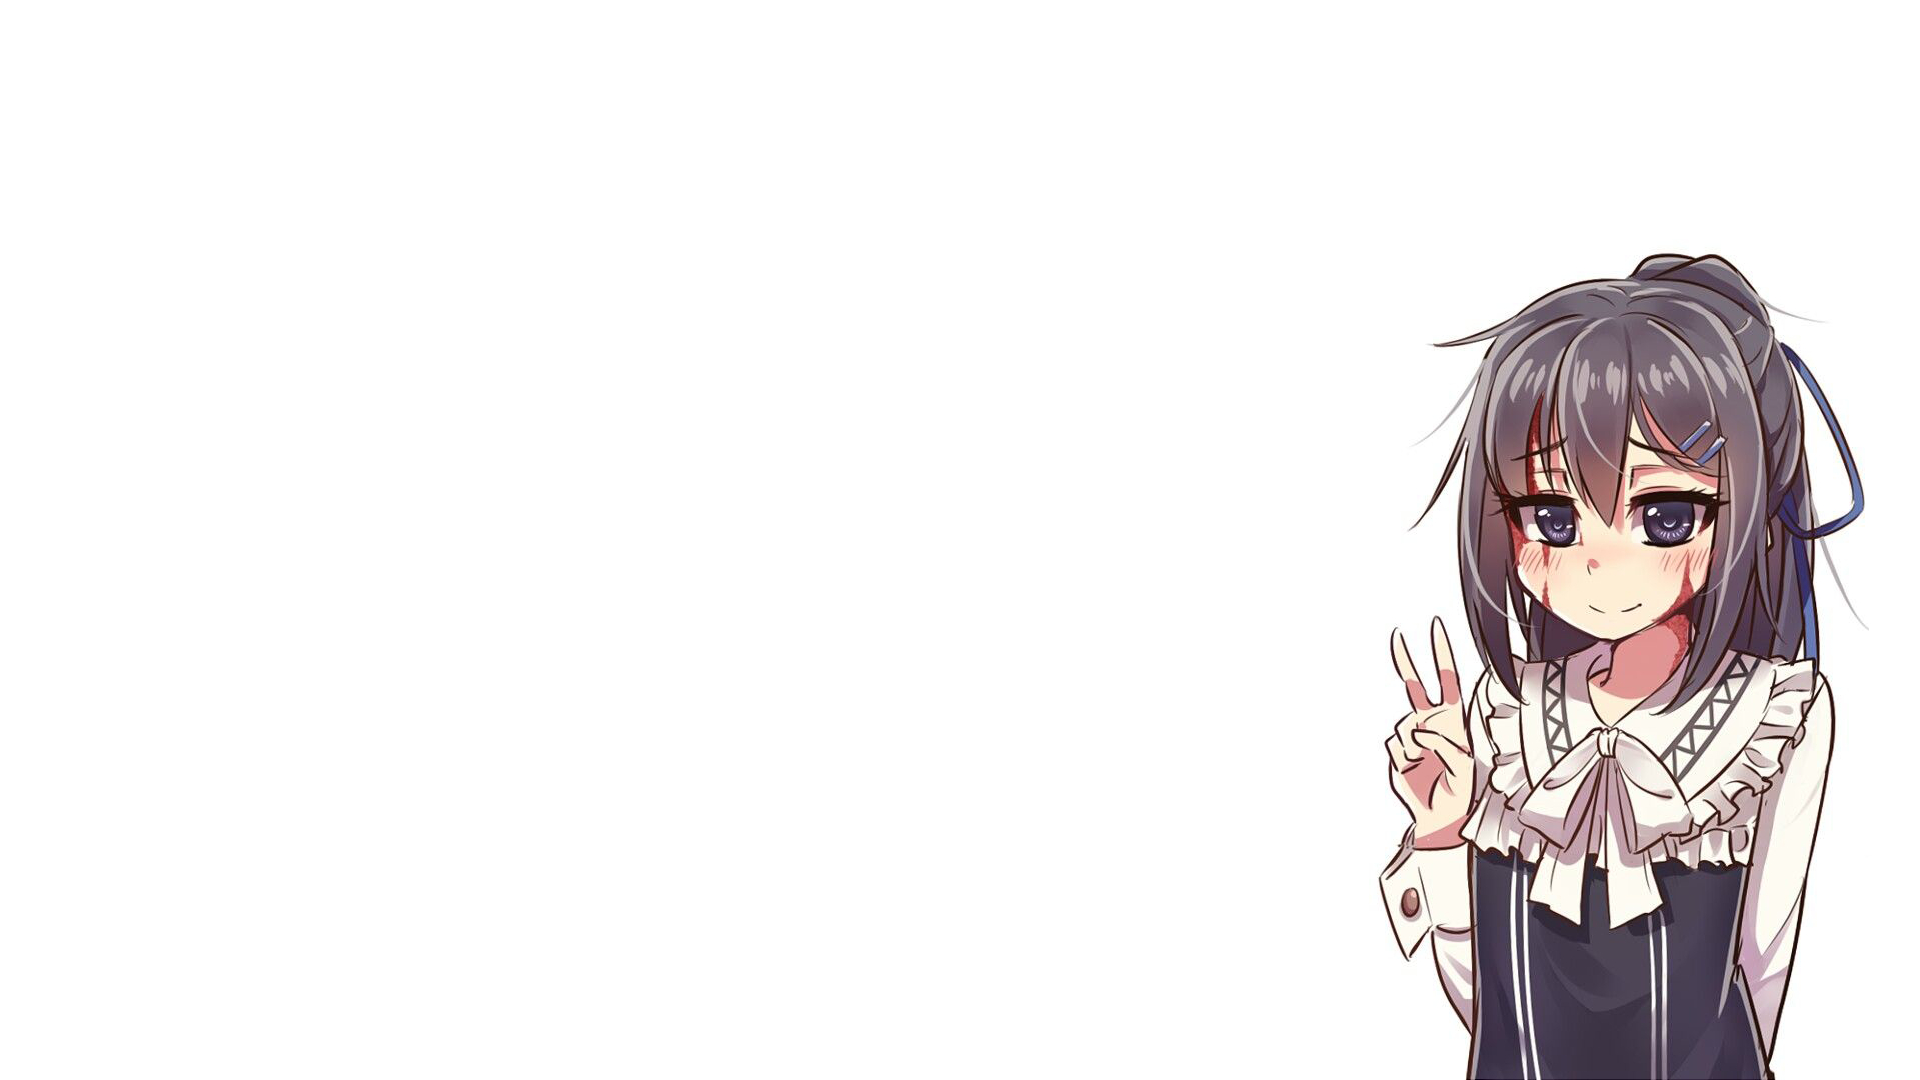 1920x1080 Wallpaper : Teaching feeling, maid outfit, scars, peace sign, brunette, video games, blushing, visual novel, simple background ChrisHUN88 1396121 HD Wallpapers